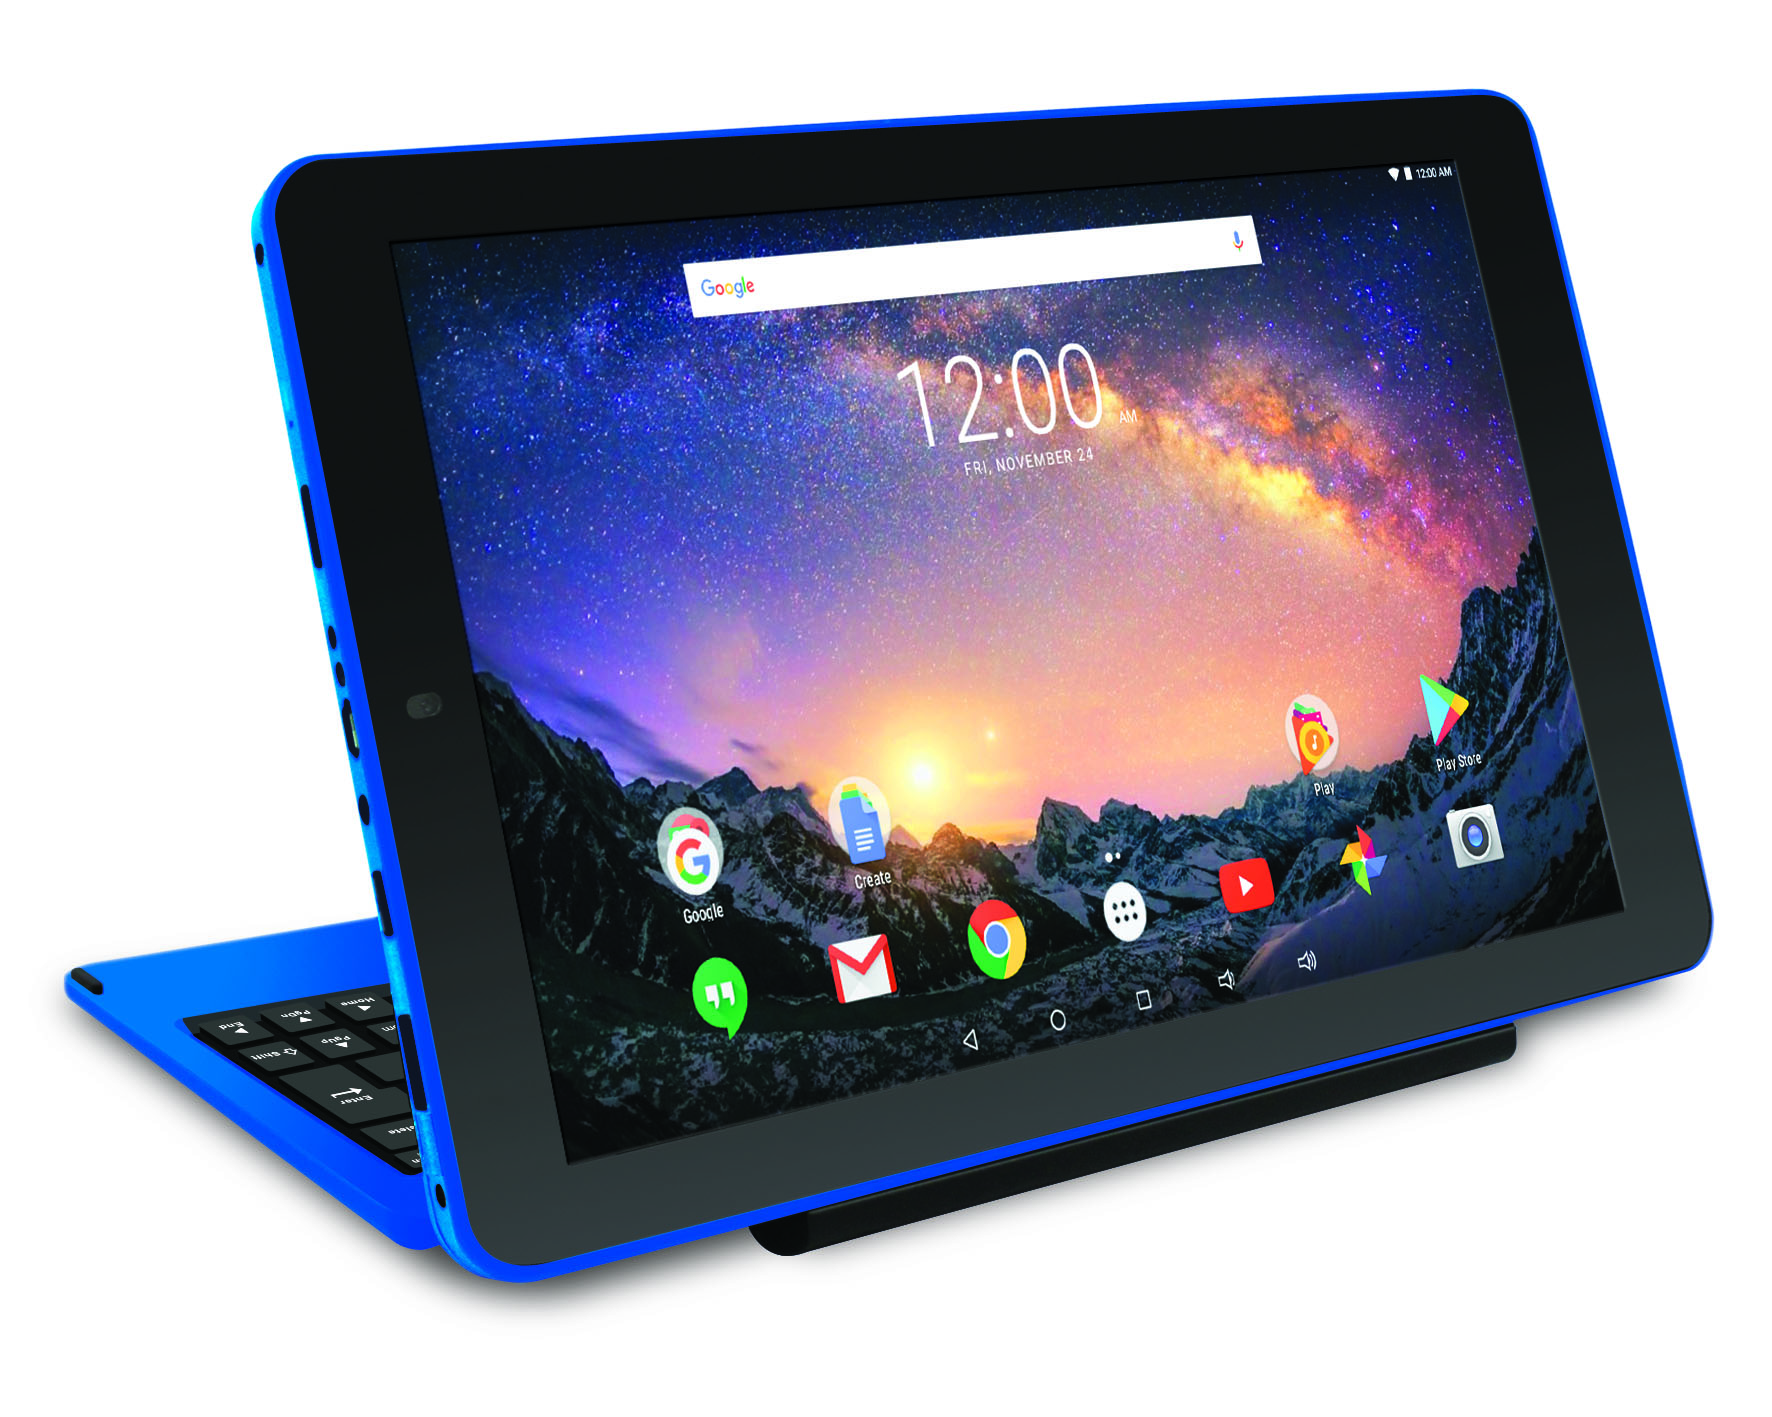 RCA Galileo Pro 11.5" 32GB 2-in-1 Tablet with Keyboard Case Android OS, Blue (Google Classroom Ready) - image 1 of 5